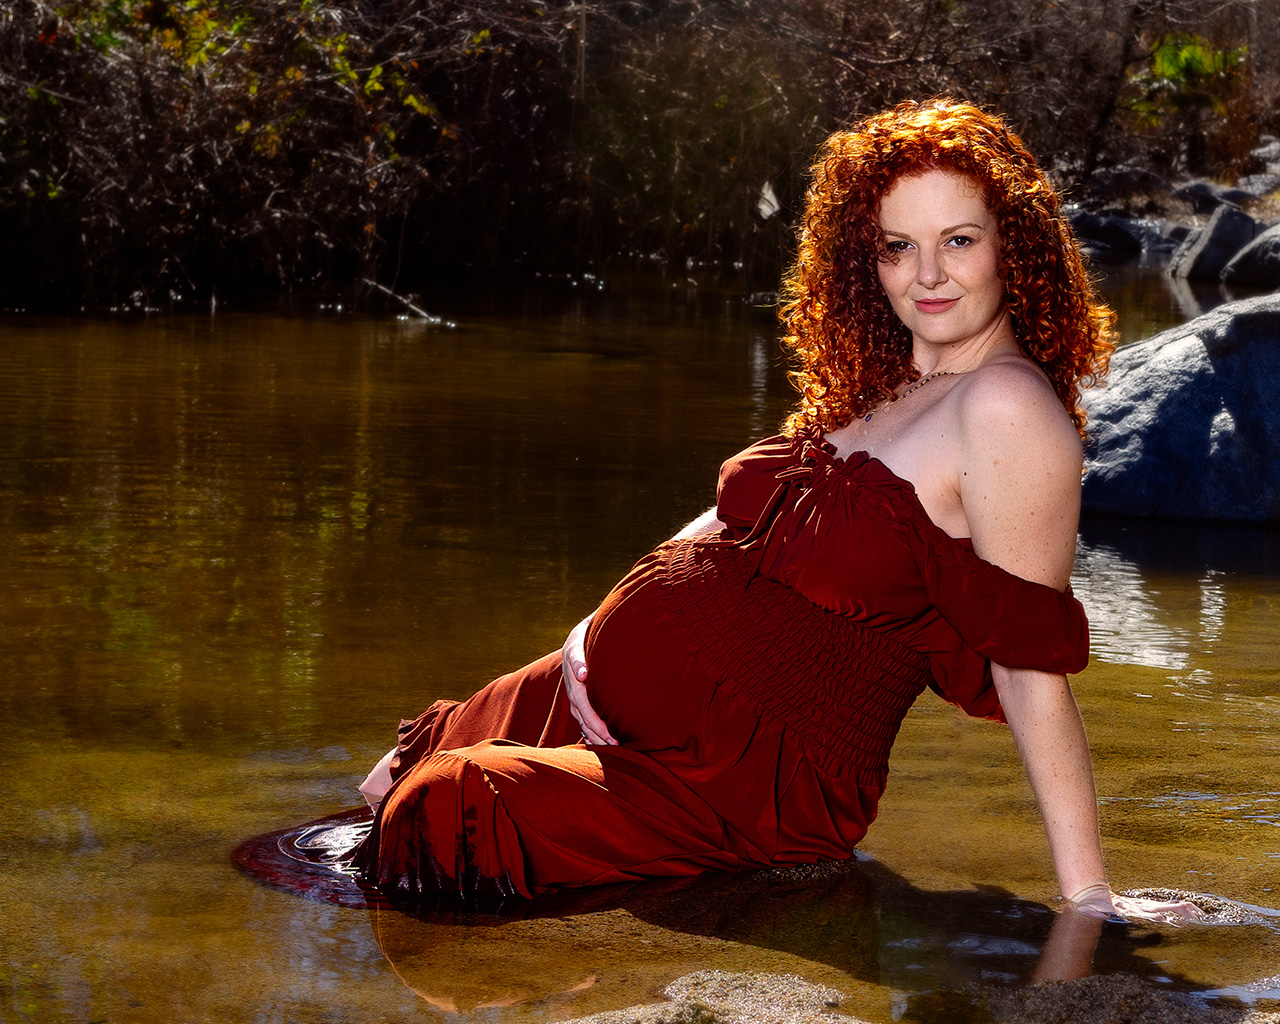 outdoor maternity photoshoot showing a pregnant woman in a brown dress sitting in a creek by Leona Darnell